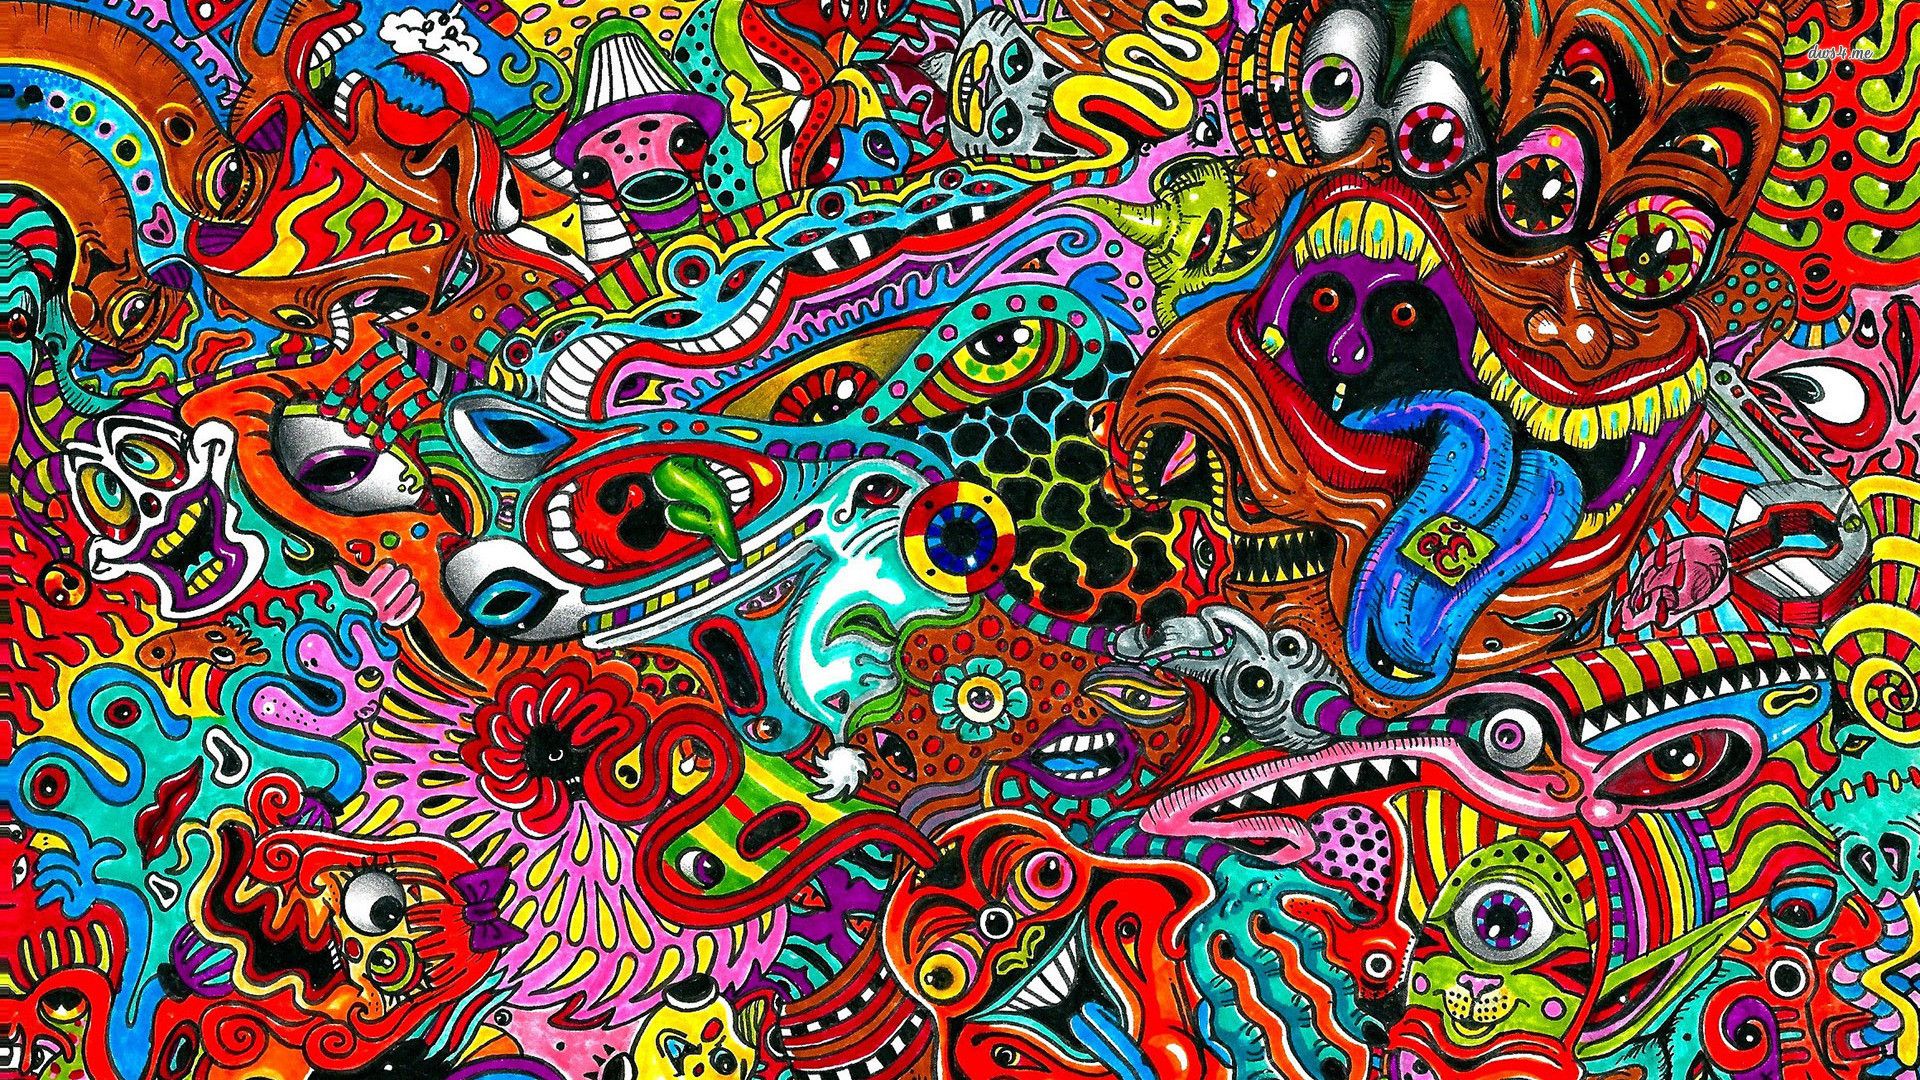 Mobile wallpaper: Colorful, Creature, Artistic, Psychedelic, Trippy,  1428301 download the picture for free.